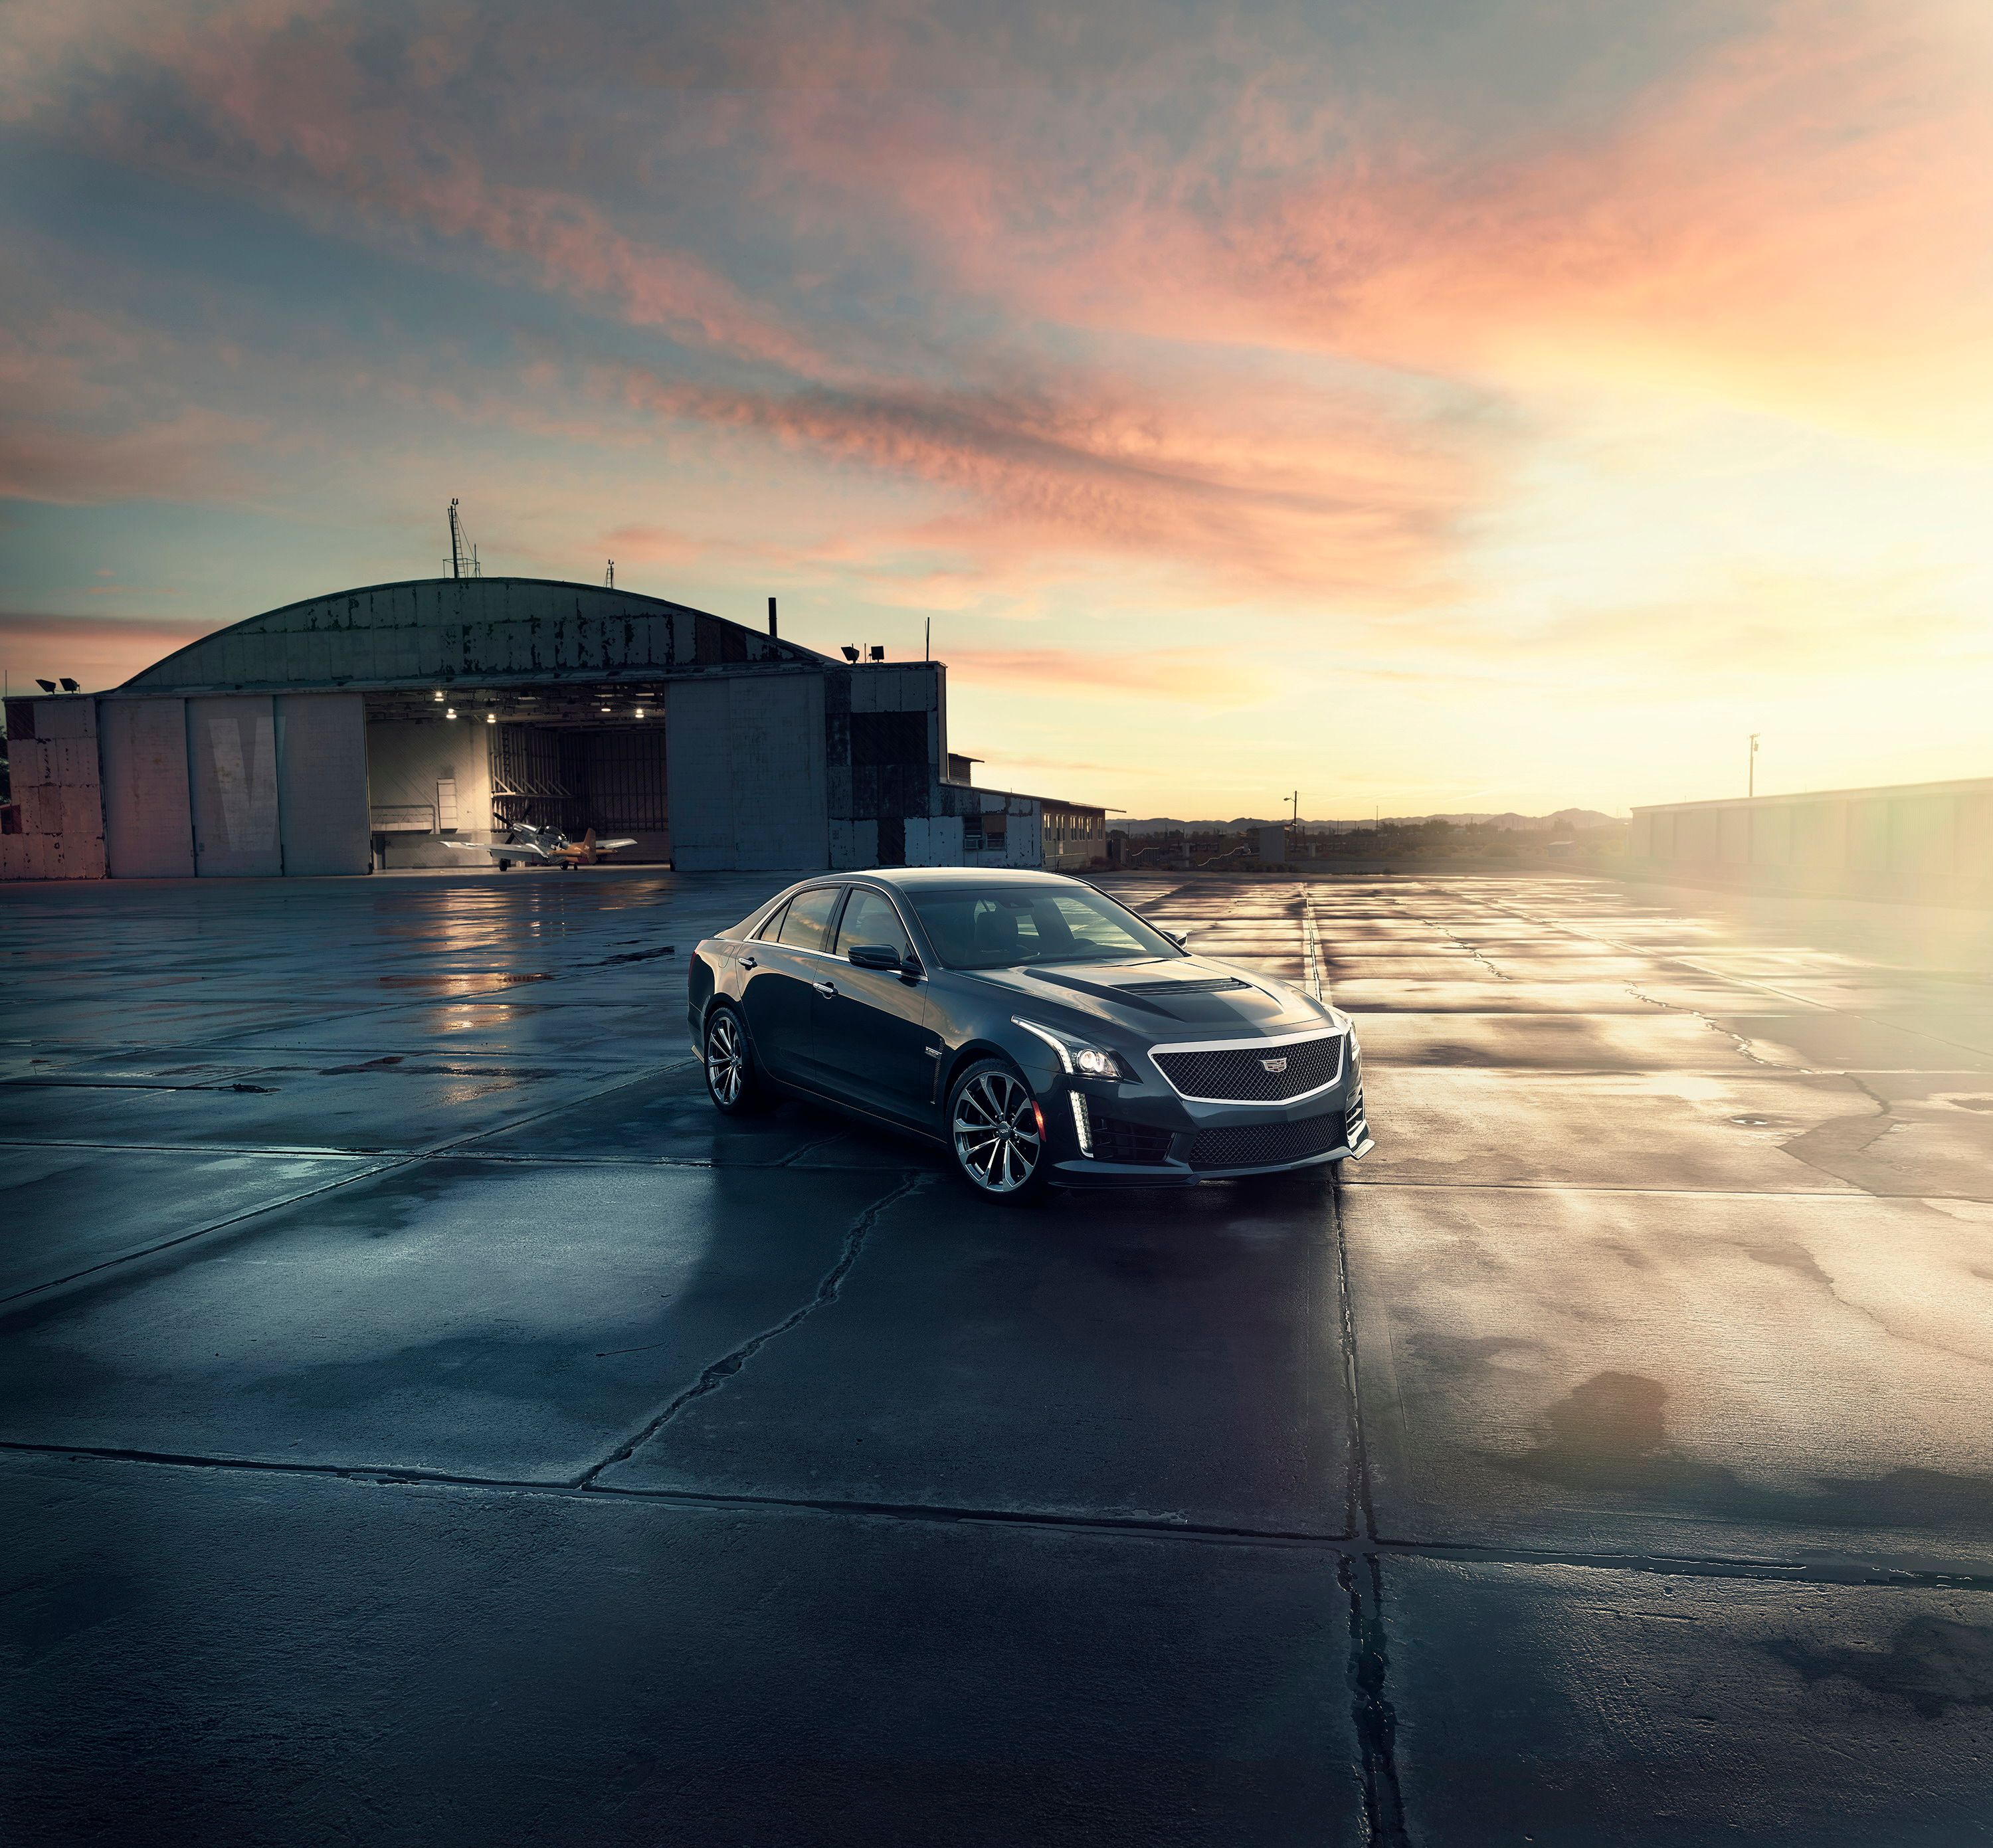 2019 Wallpaper of the Day: 2016 Cadillac CTS-V